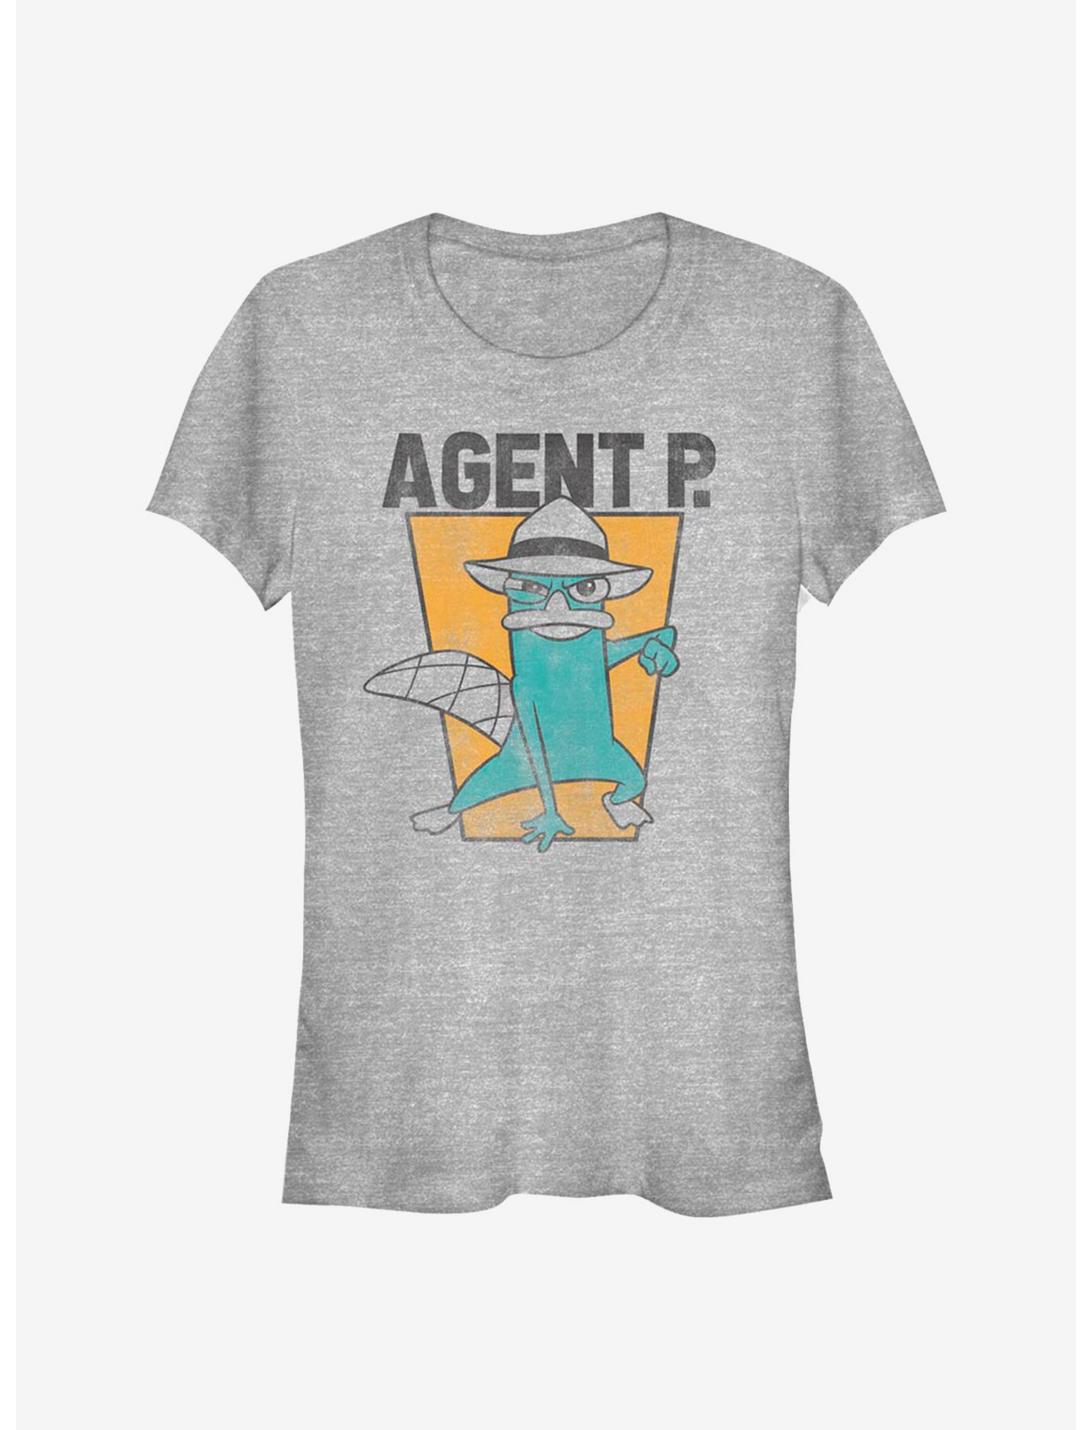 Disney Phineas And Ferb Agent P Girls T-Shirt, ATH HTR, hi-res